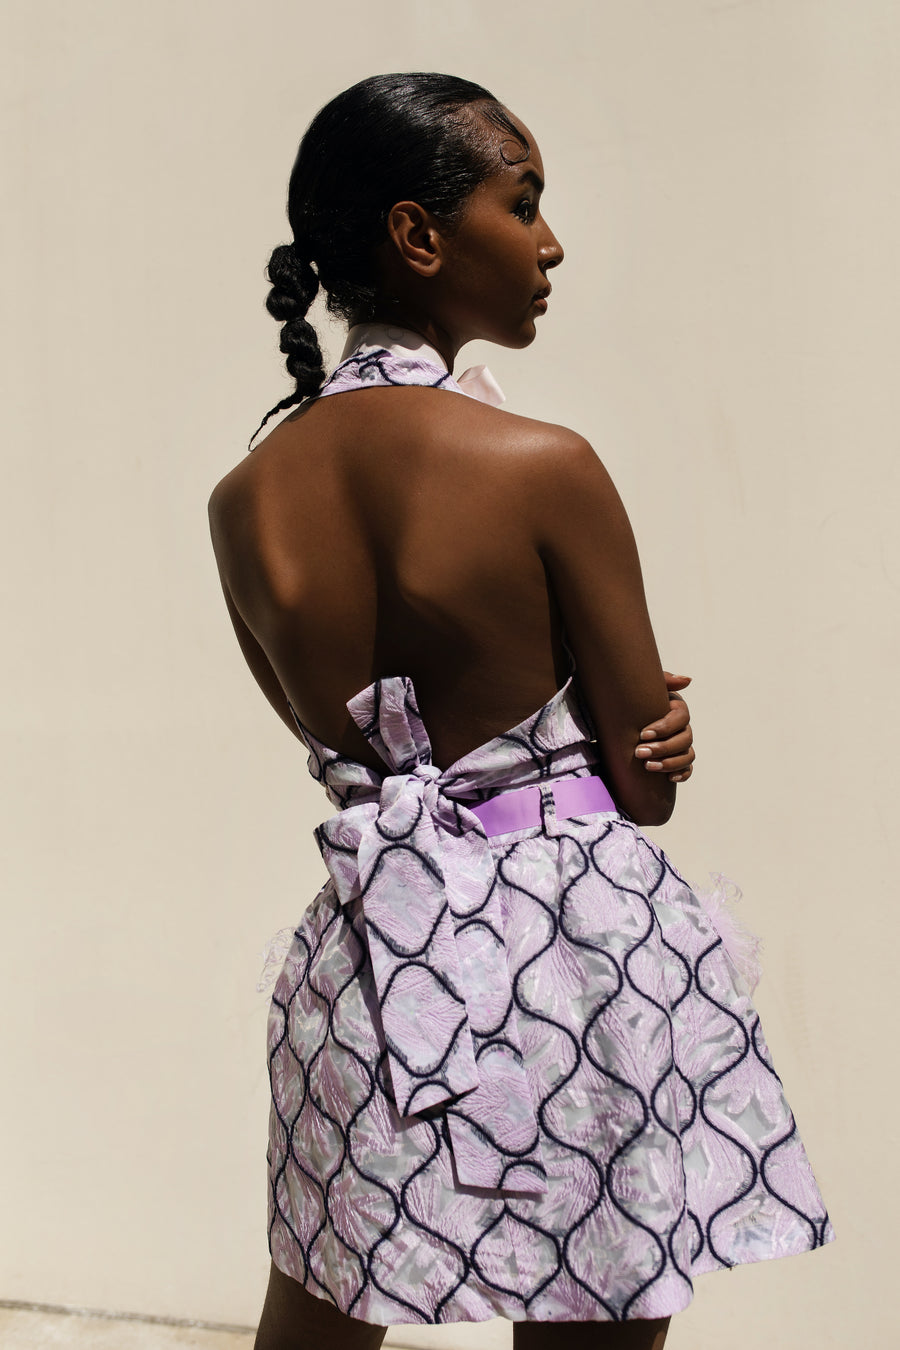 andreeva lavender skirt with feathers